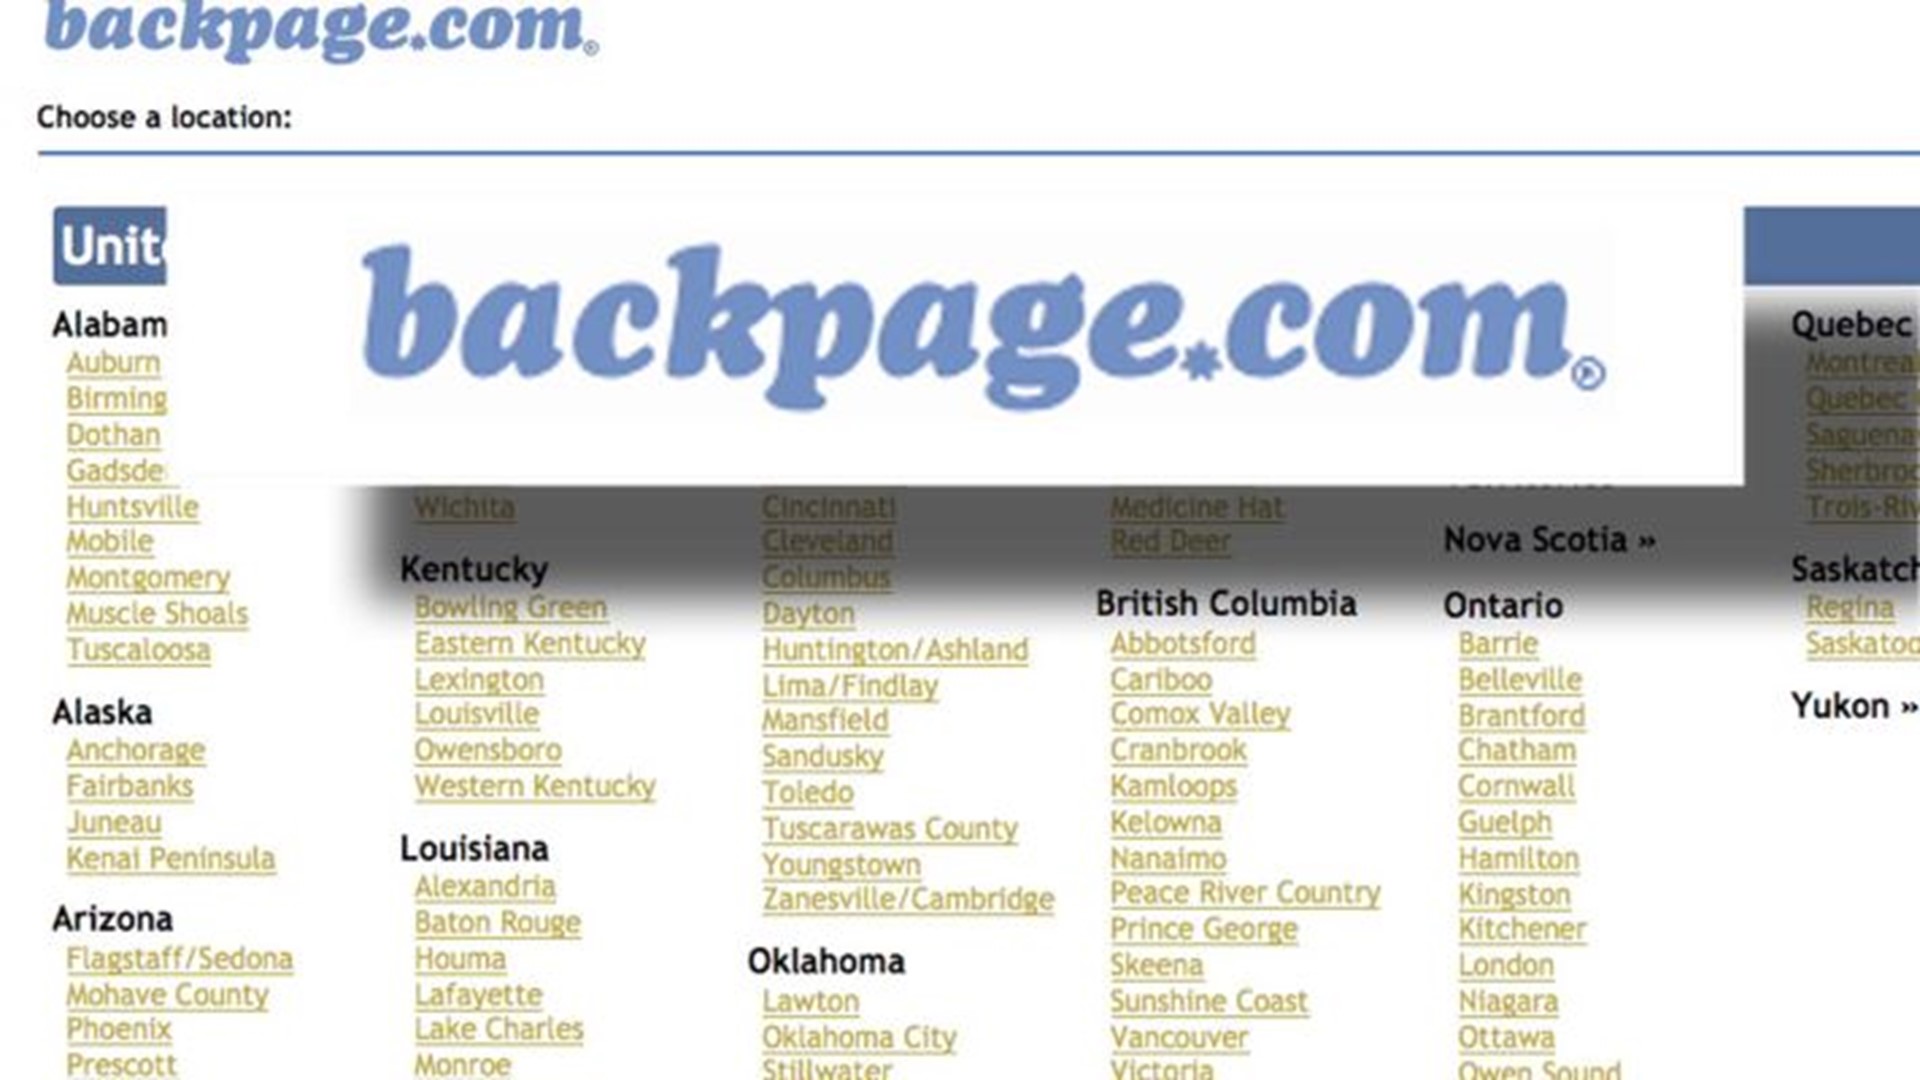 dave southwick recommends backpage auburn alabama classifieds pic